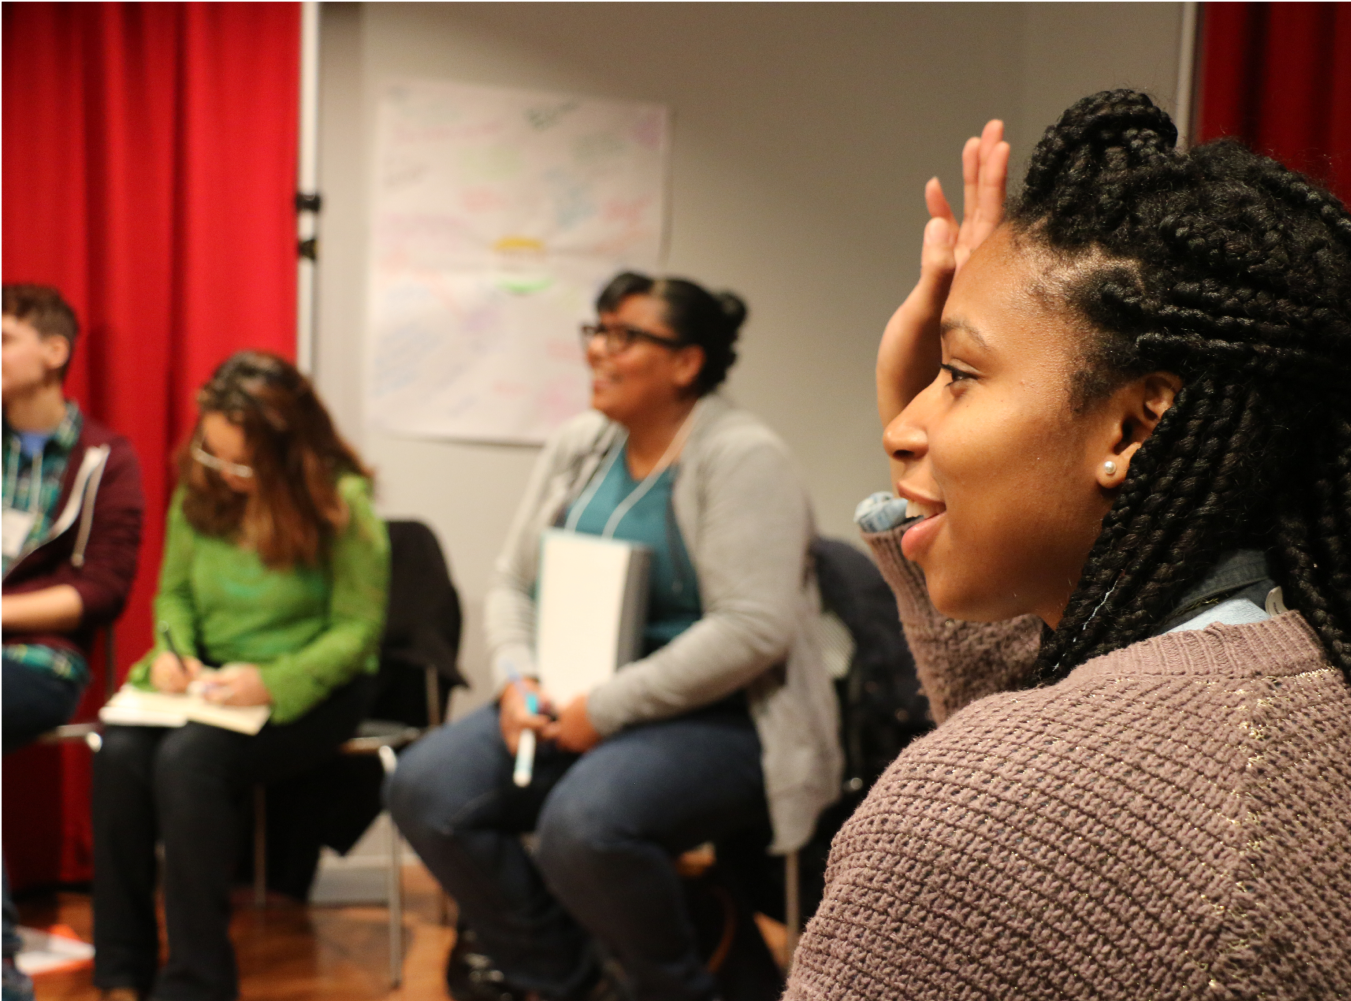 Teaching Artist Project participant in profile raises her hand for recognition in classroom.